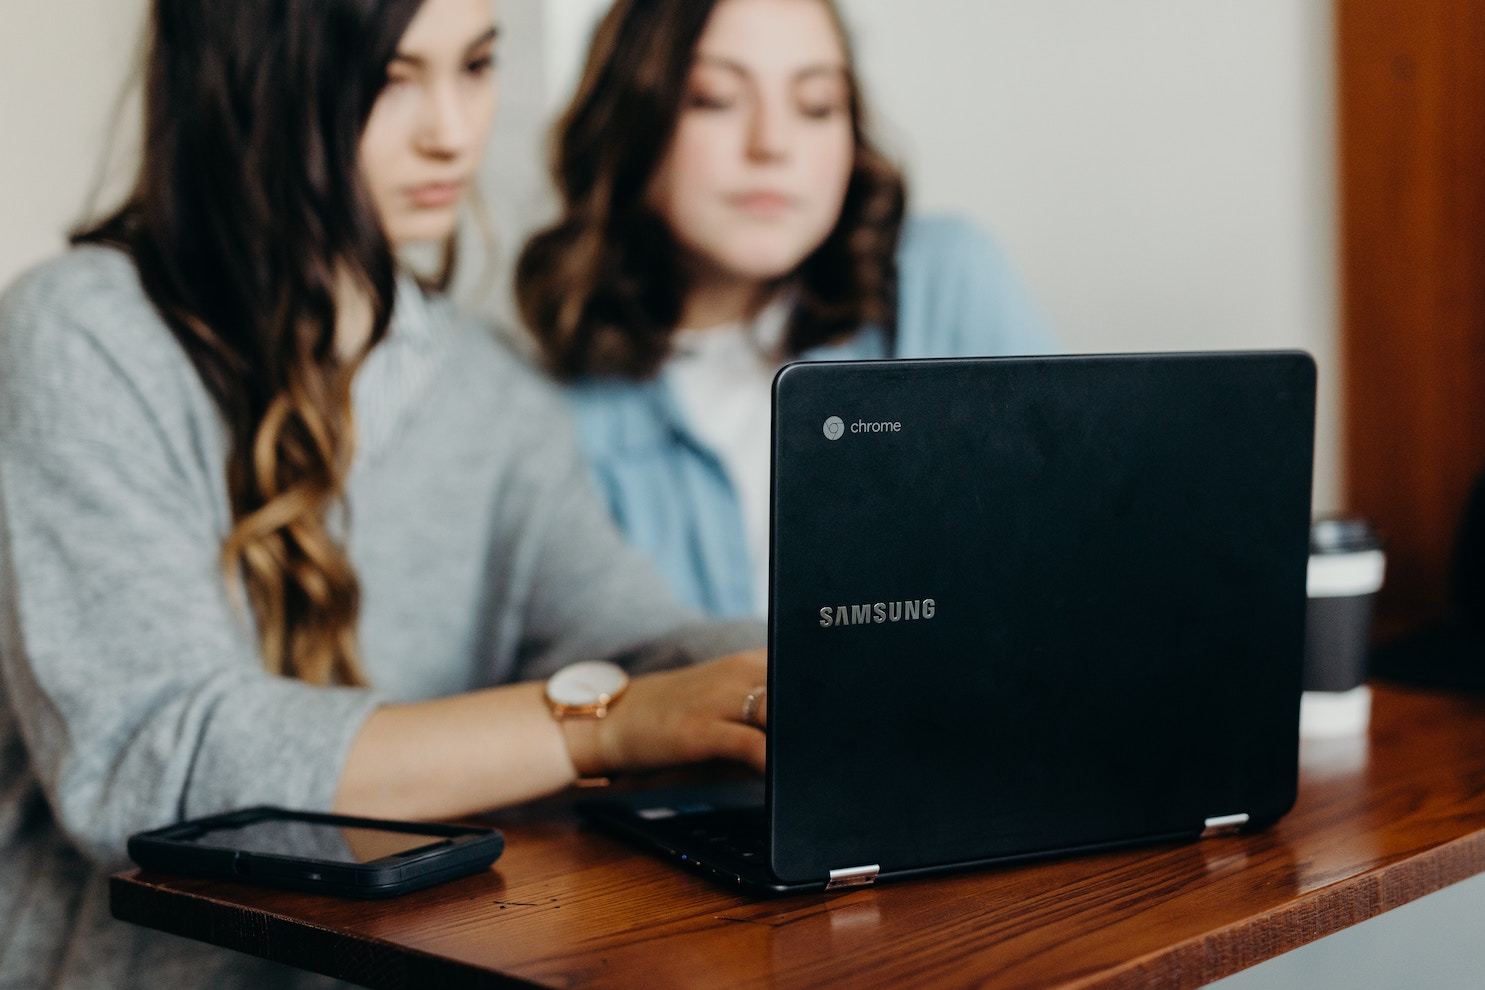 two women look at a laptop together